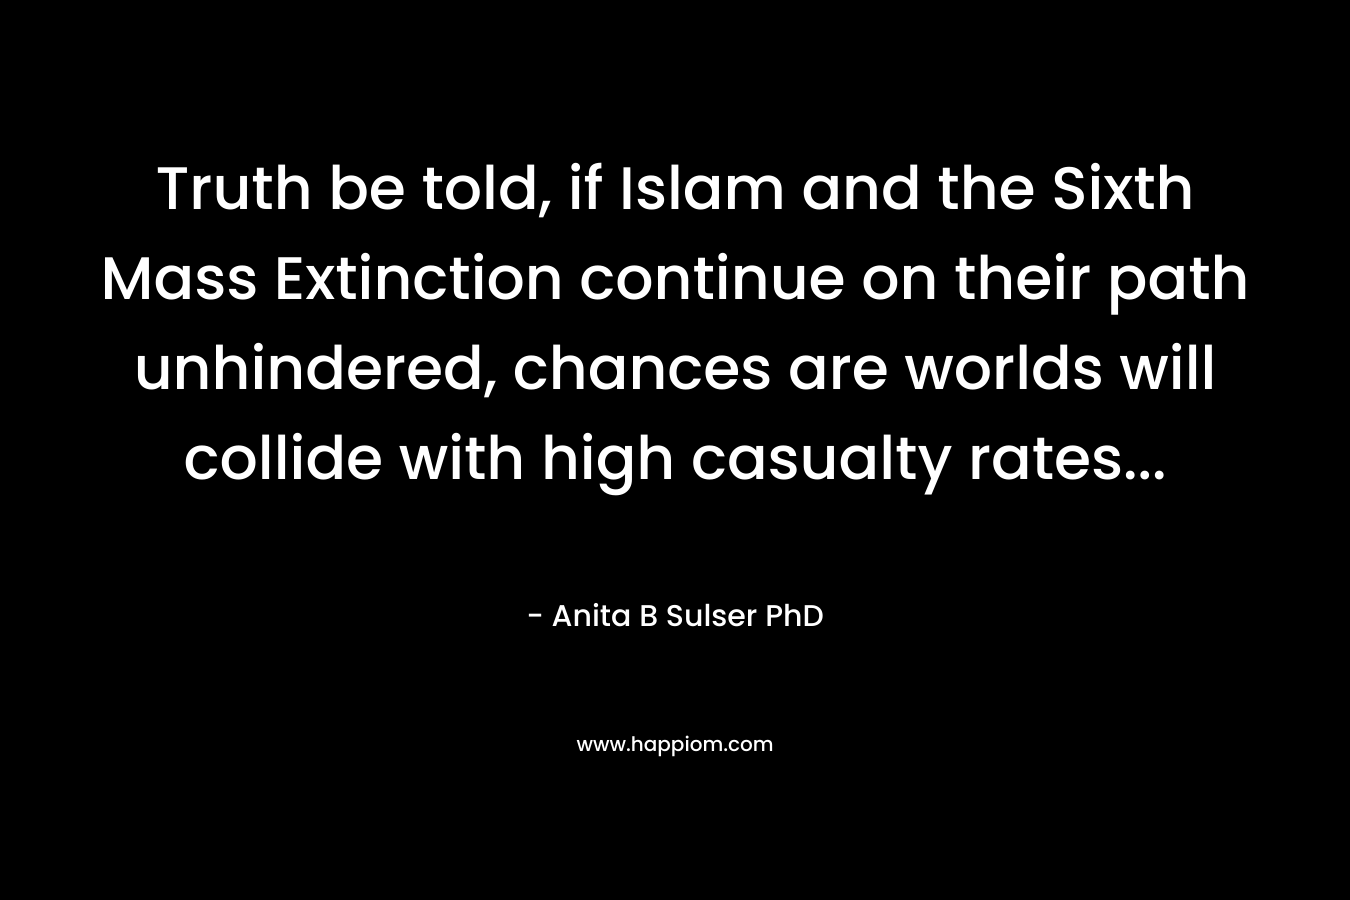 Truth be told, if Islam and the Sixth Mass Extinction continue on their path unhindered, chances are worlds will collide with high casualty rates… – Anita B Sulser PhD